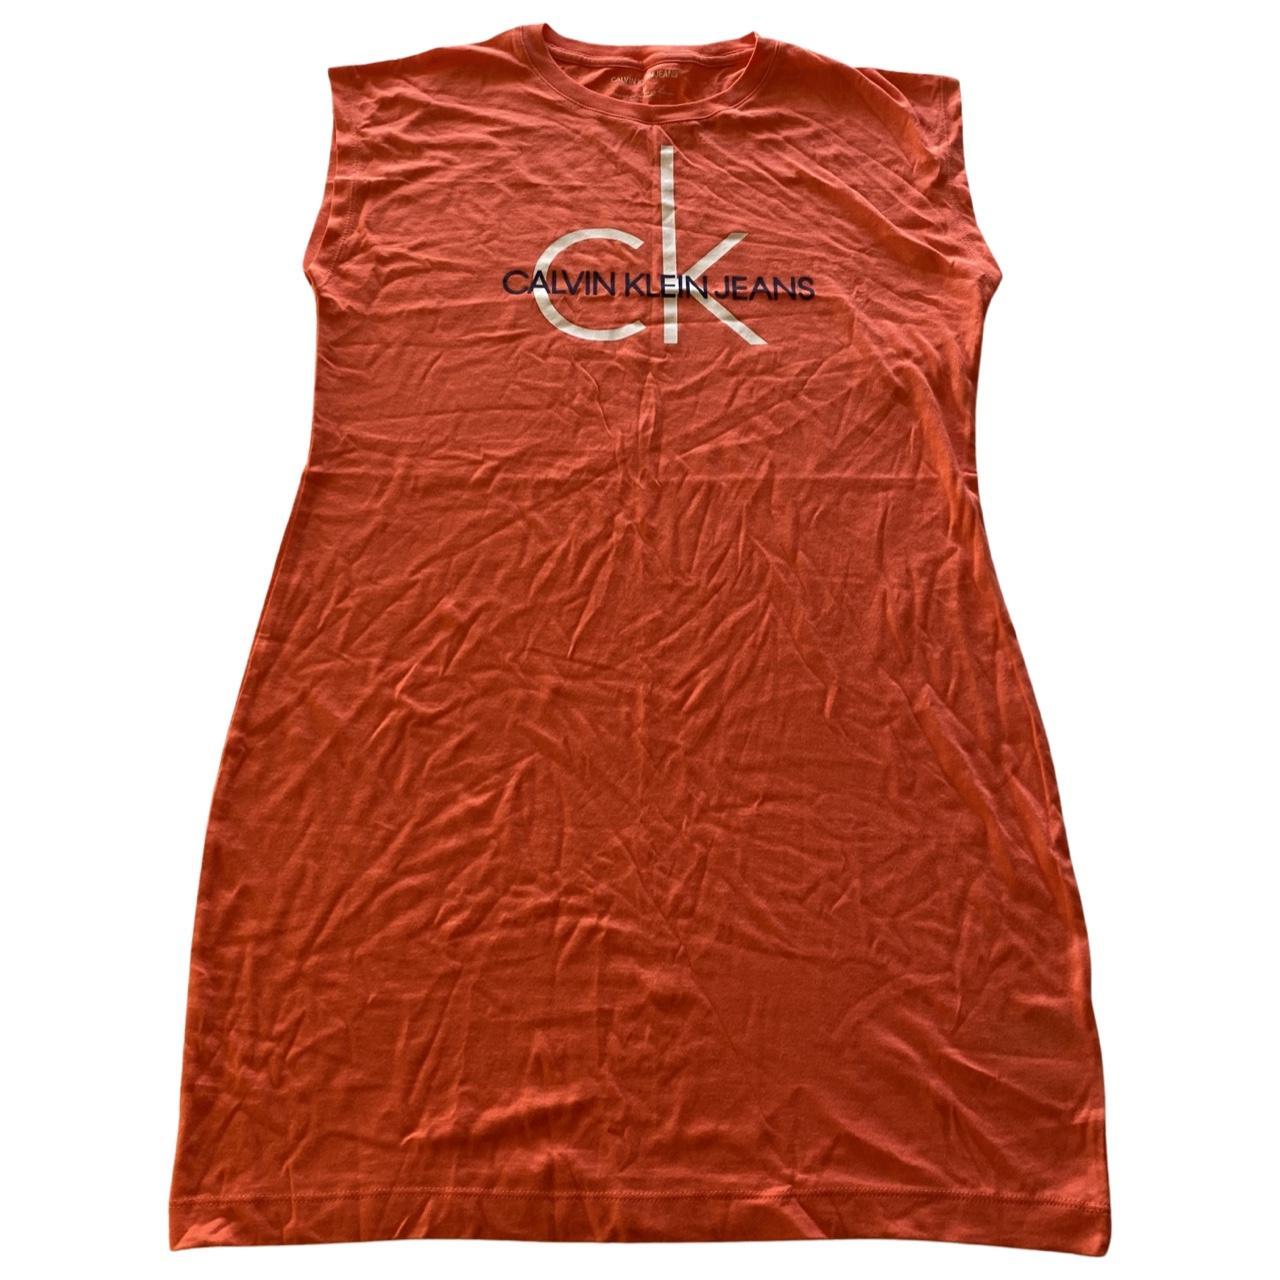 Product Image 1 - This is an orange CK